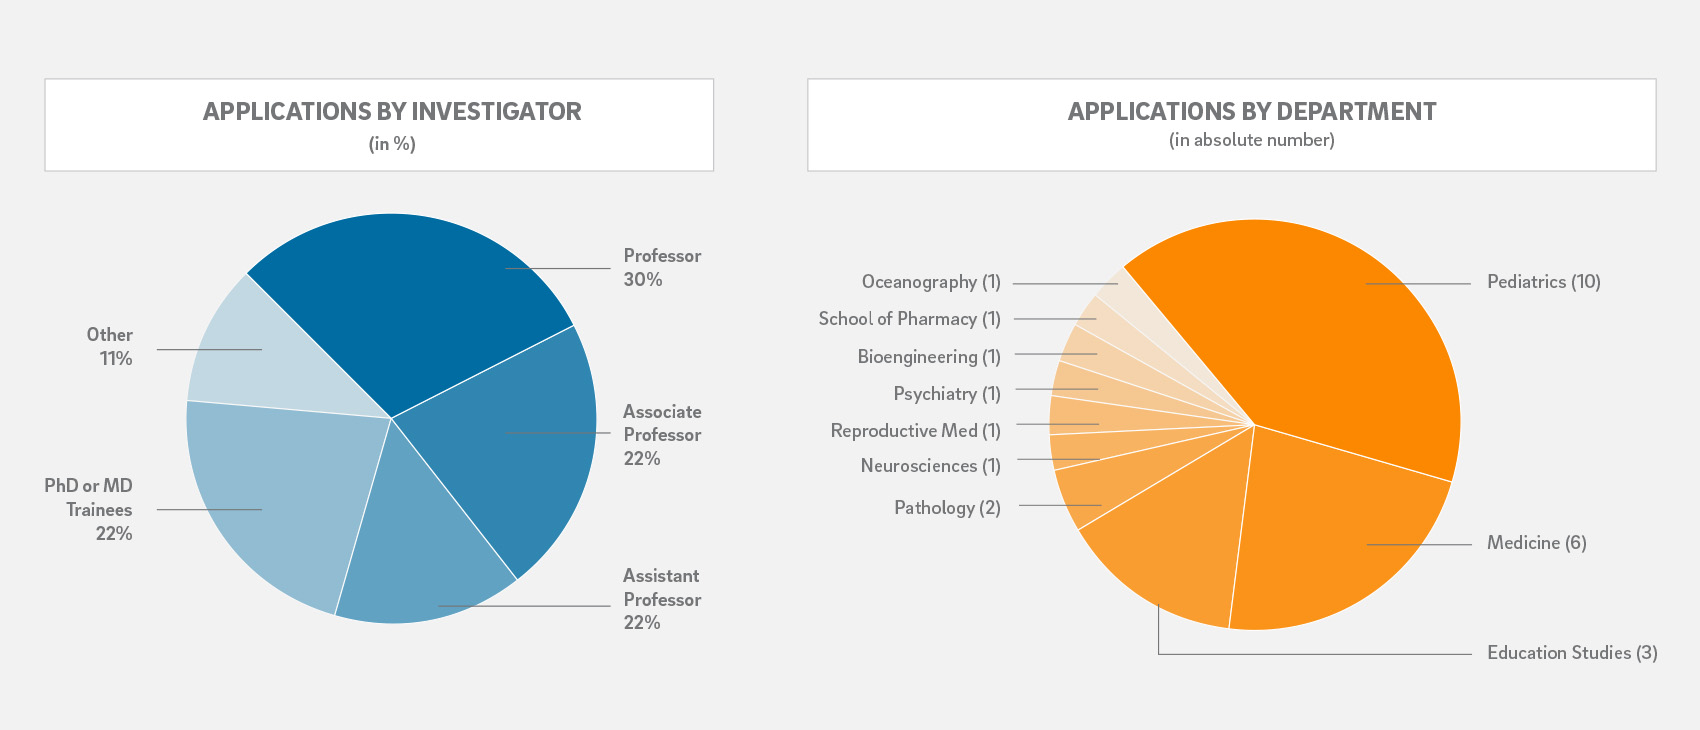 pie charts for percentagese of applications by investigator level and by department